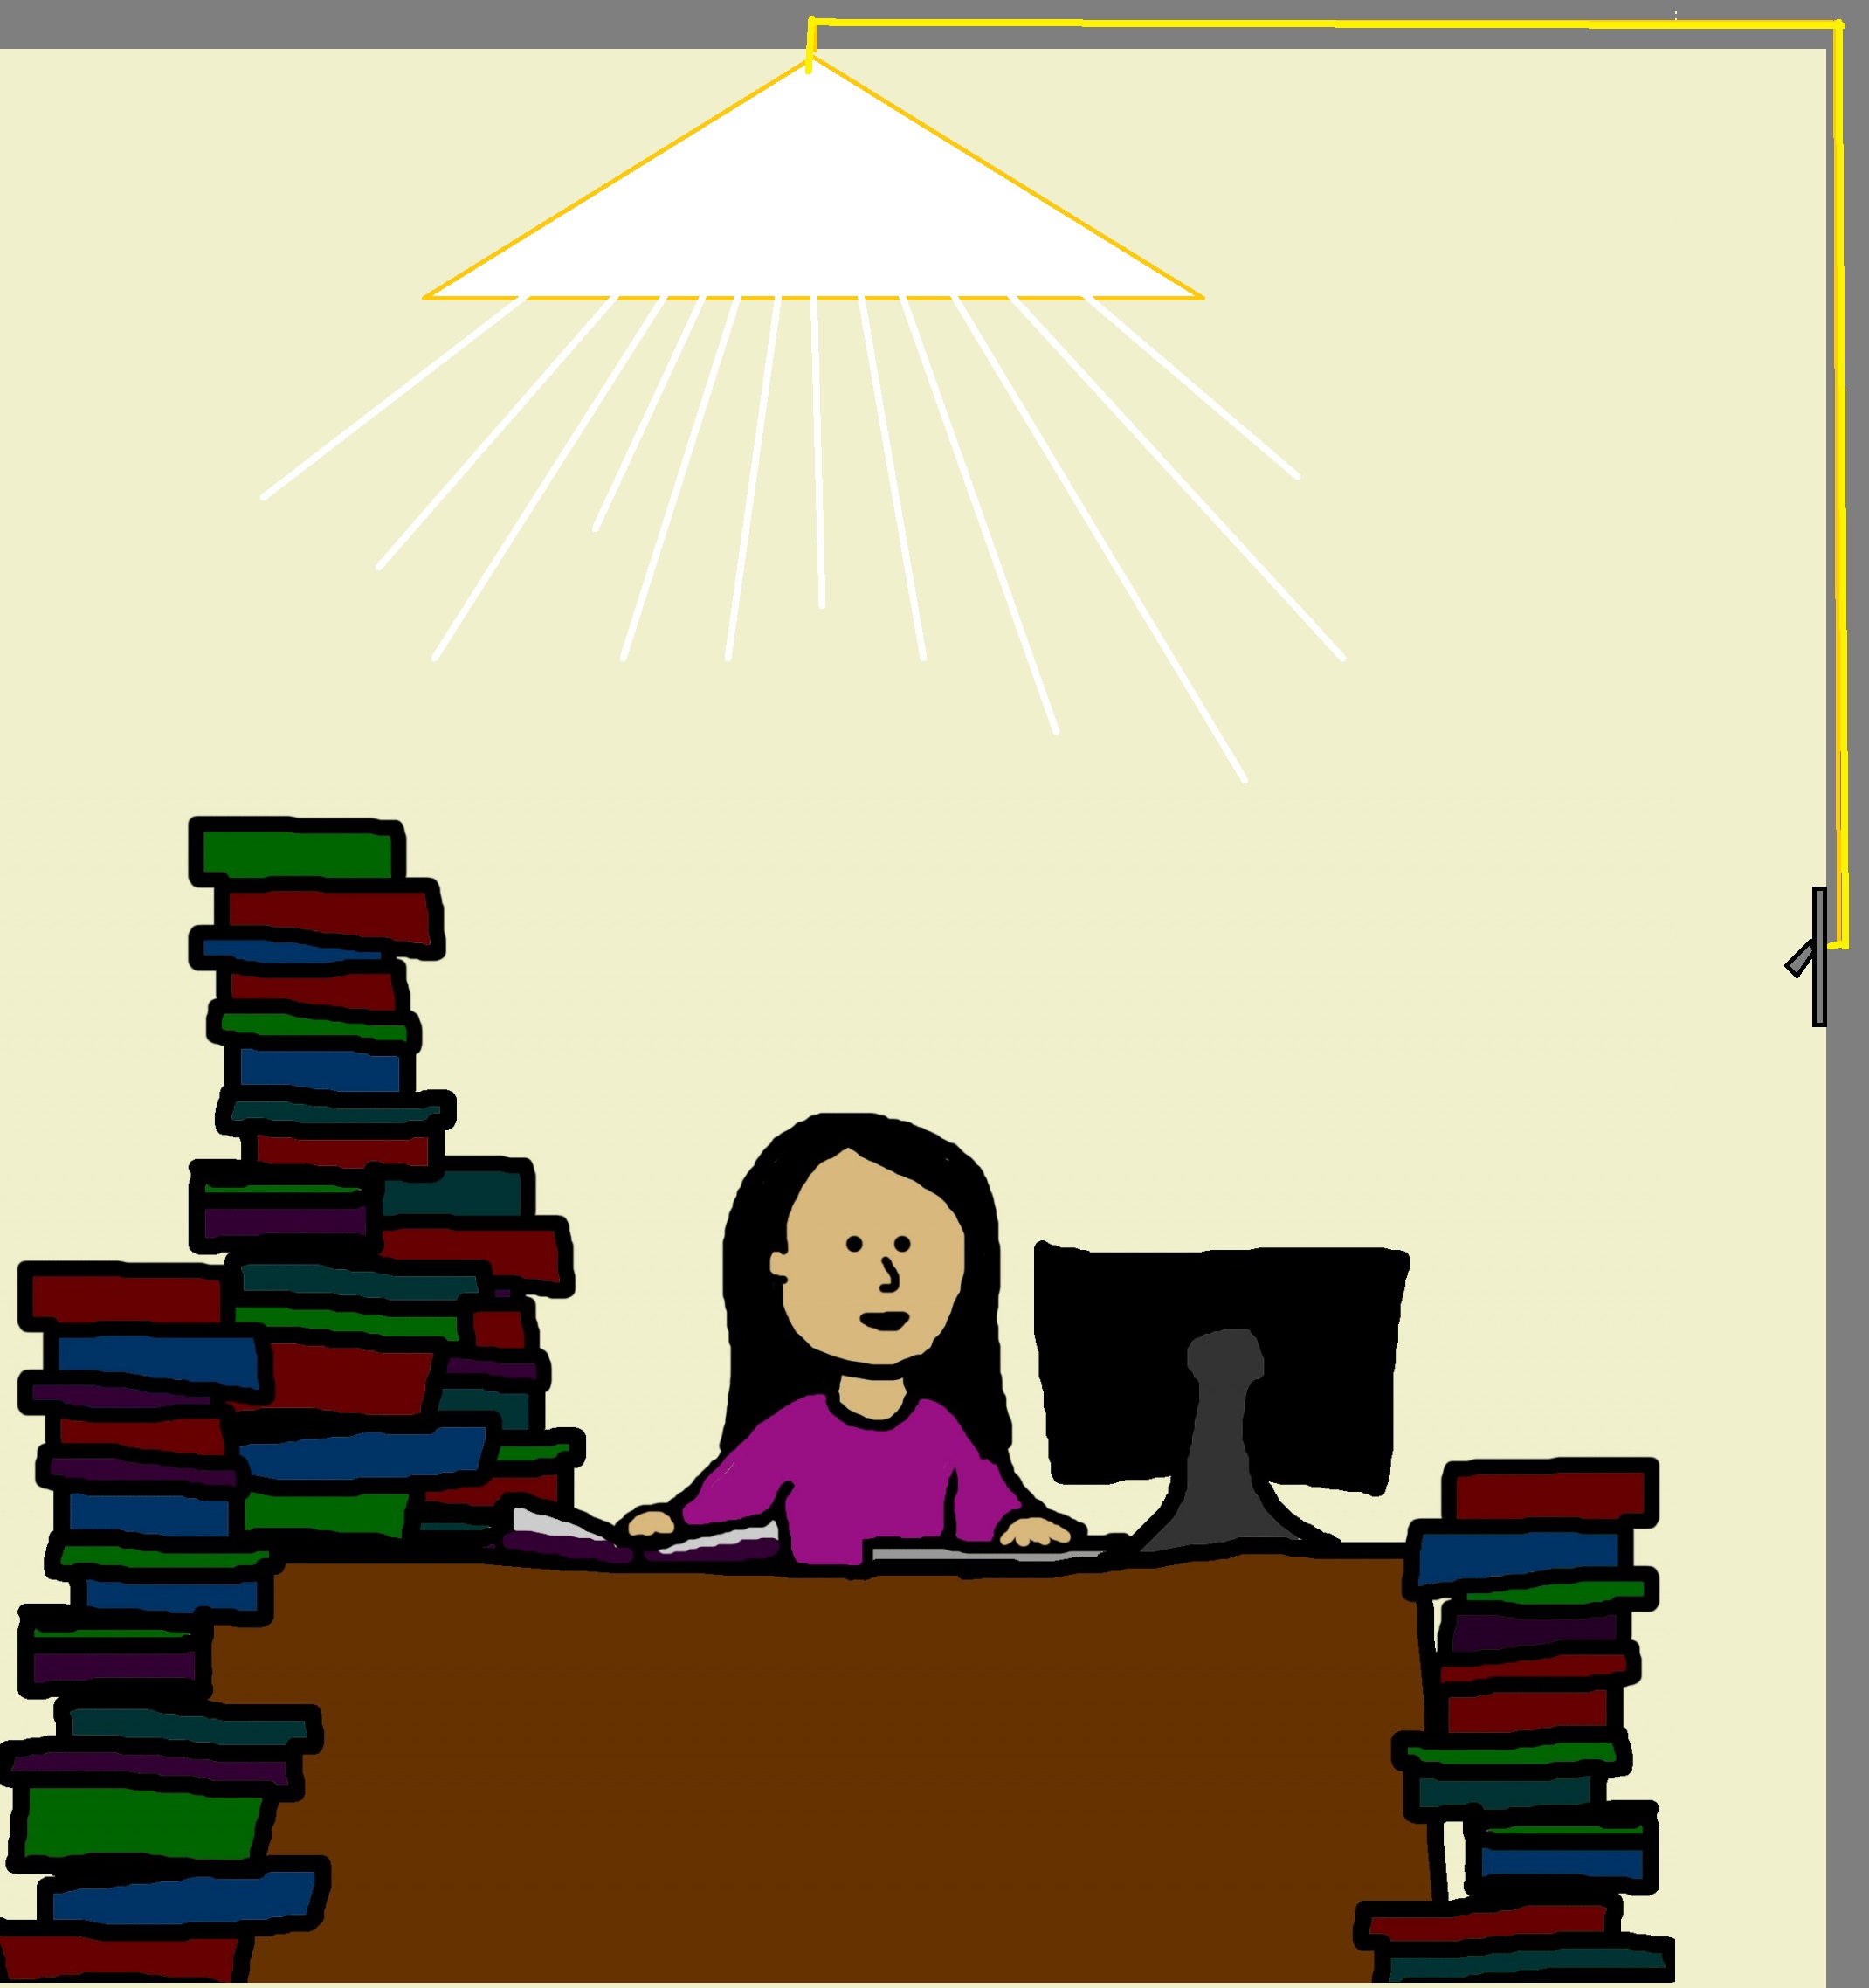 cartoon of woman at desk with books, under a ceiling lamp. There is a switch on the wall and wires run up the wall and across the ceiling to the light.